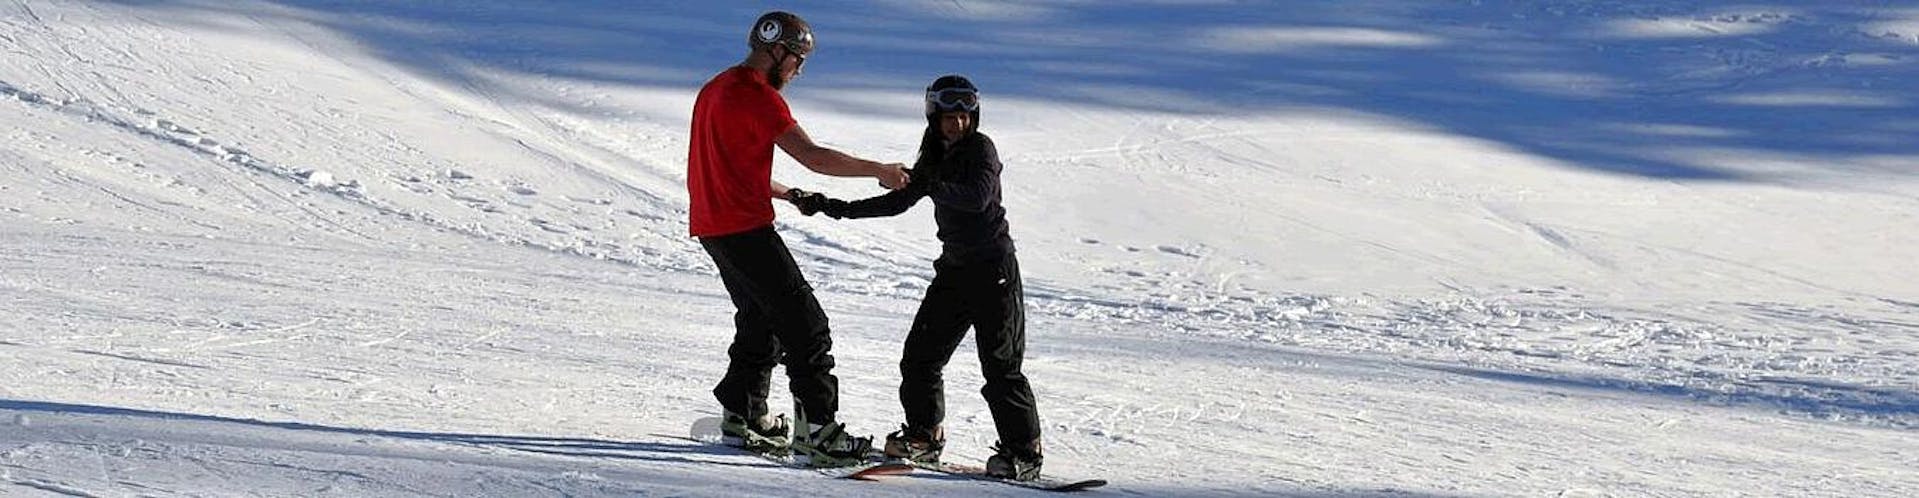 Private Snowboarding Lessons for Adults of All Levels.